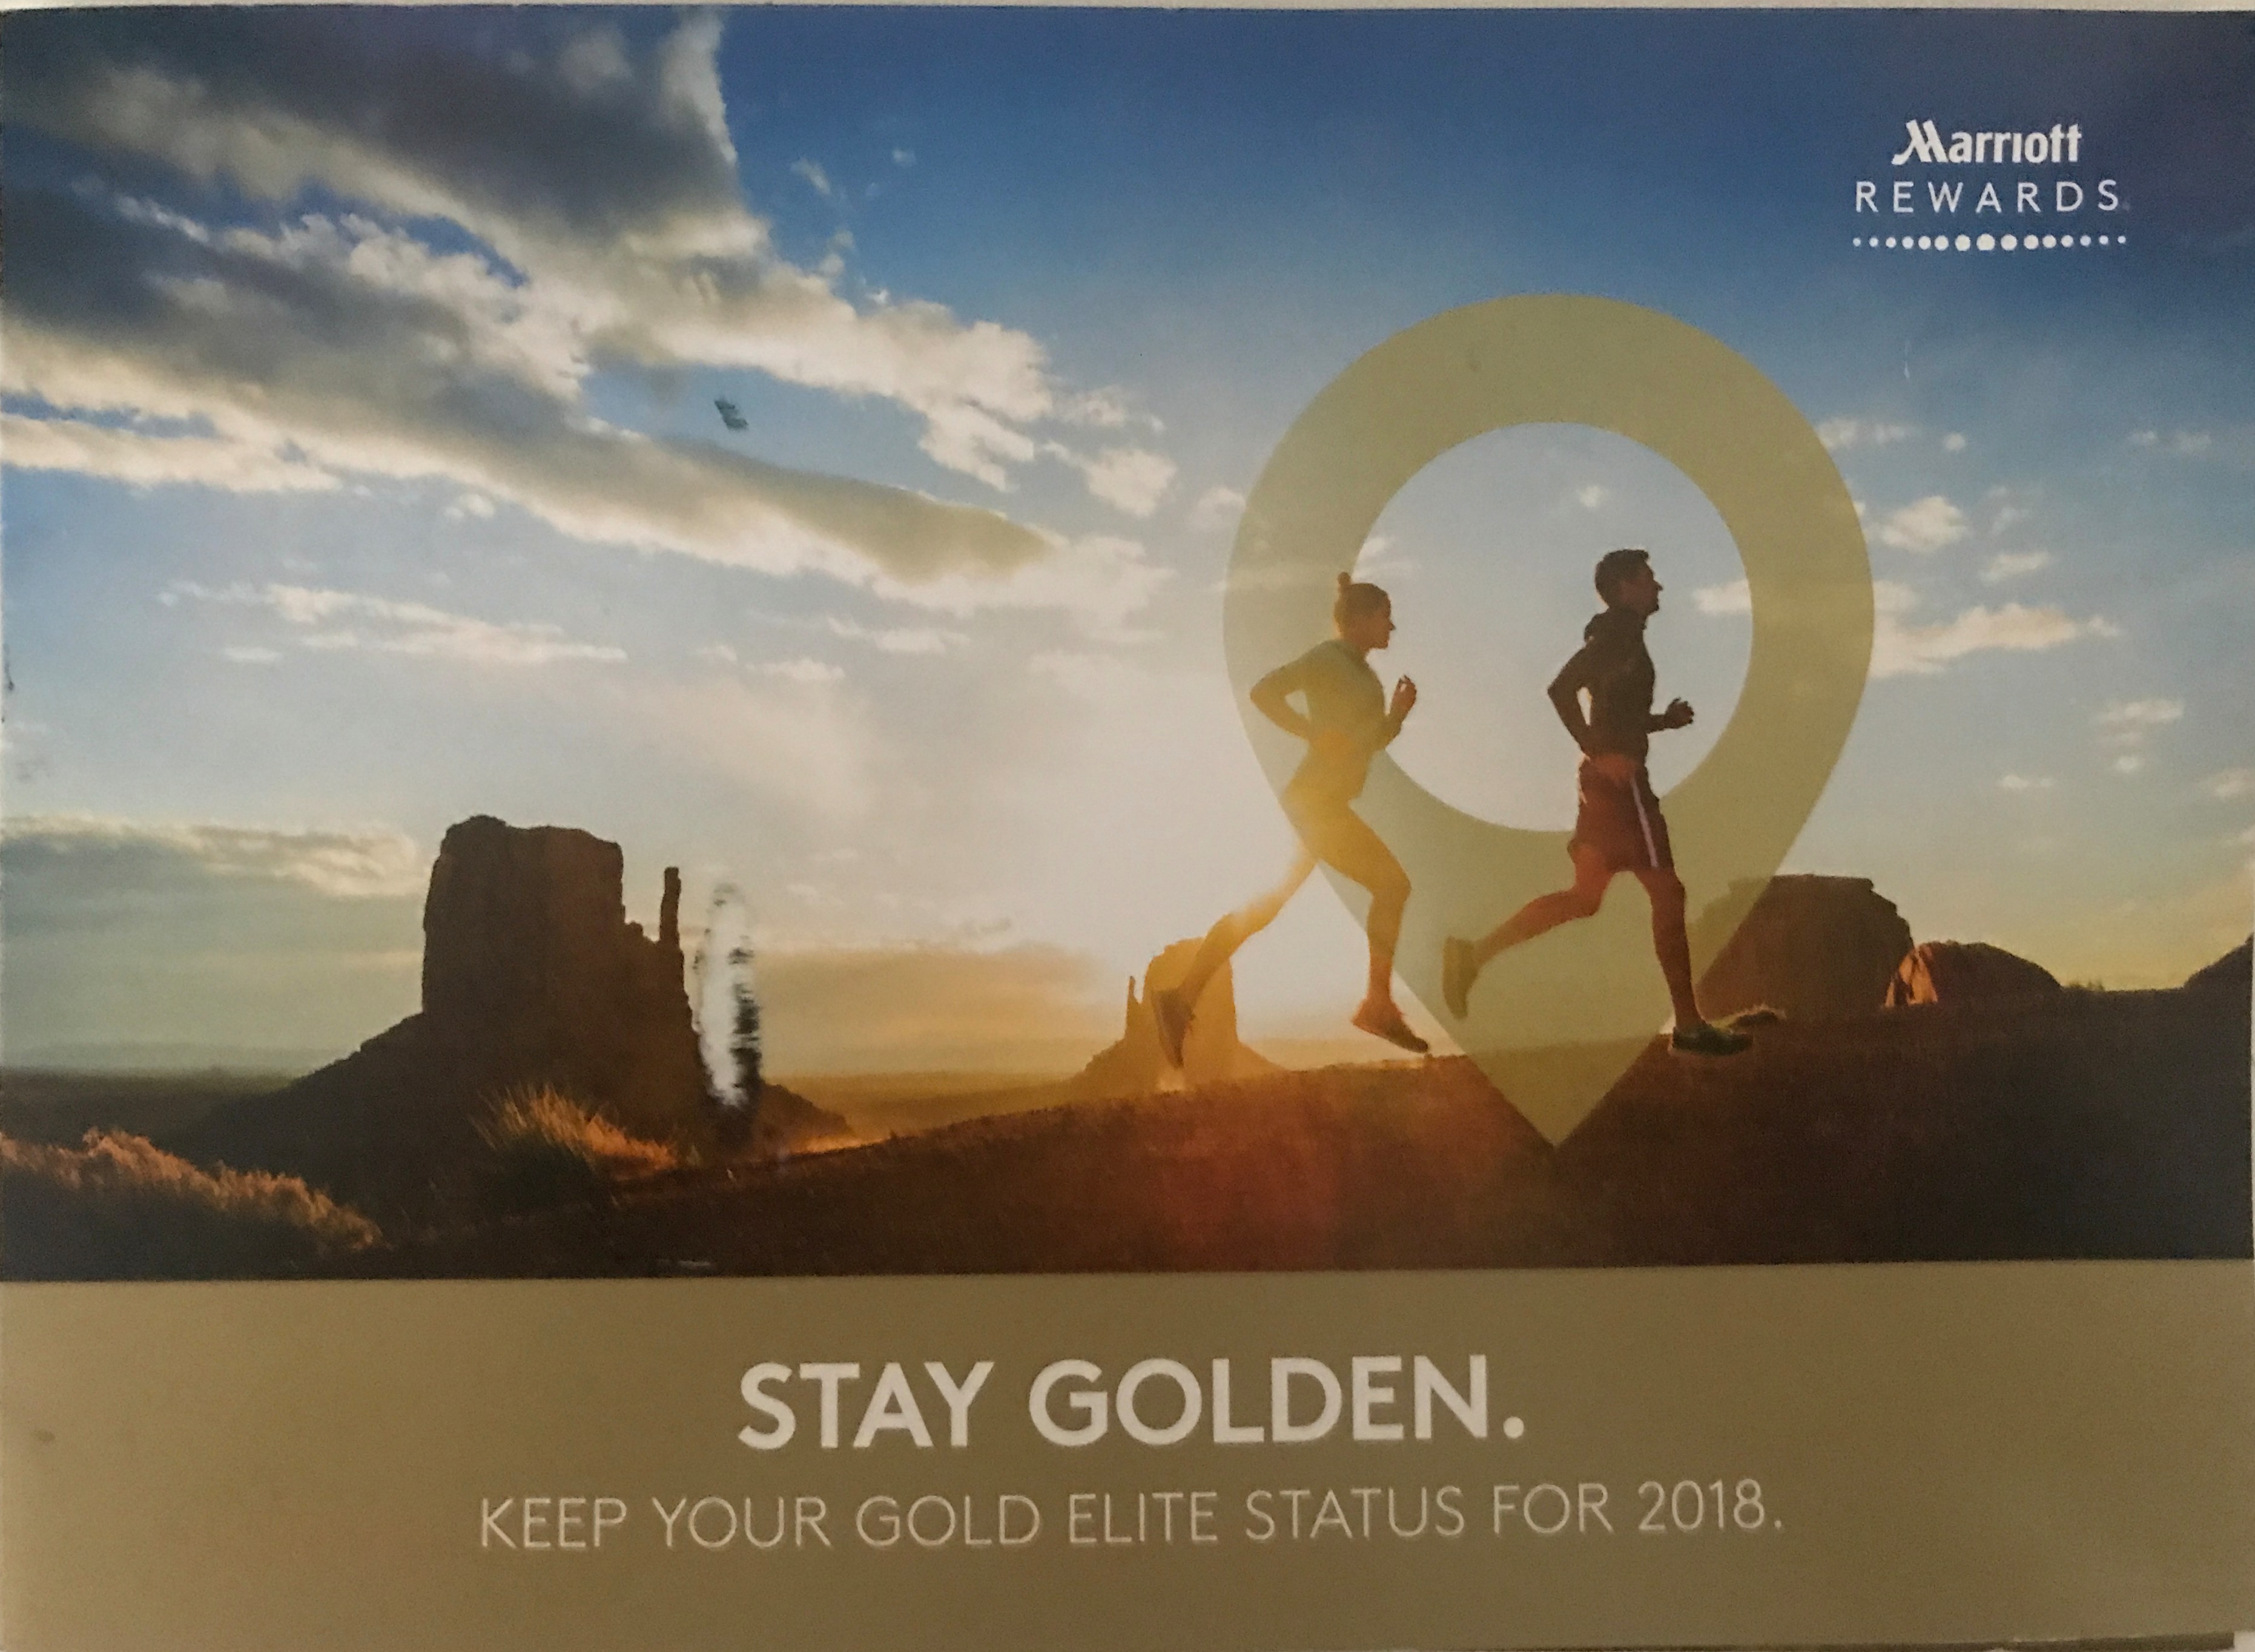 Keep Marriott Gold Elite Status Through February 2019 for ONLY 32 Qualifying Nights